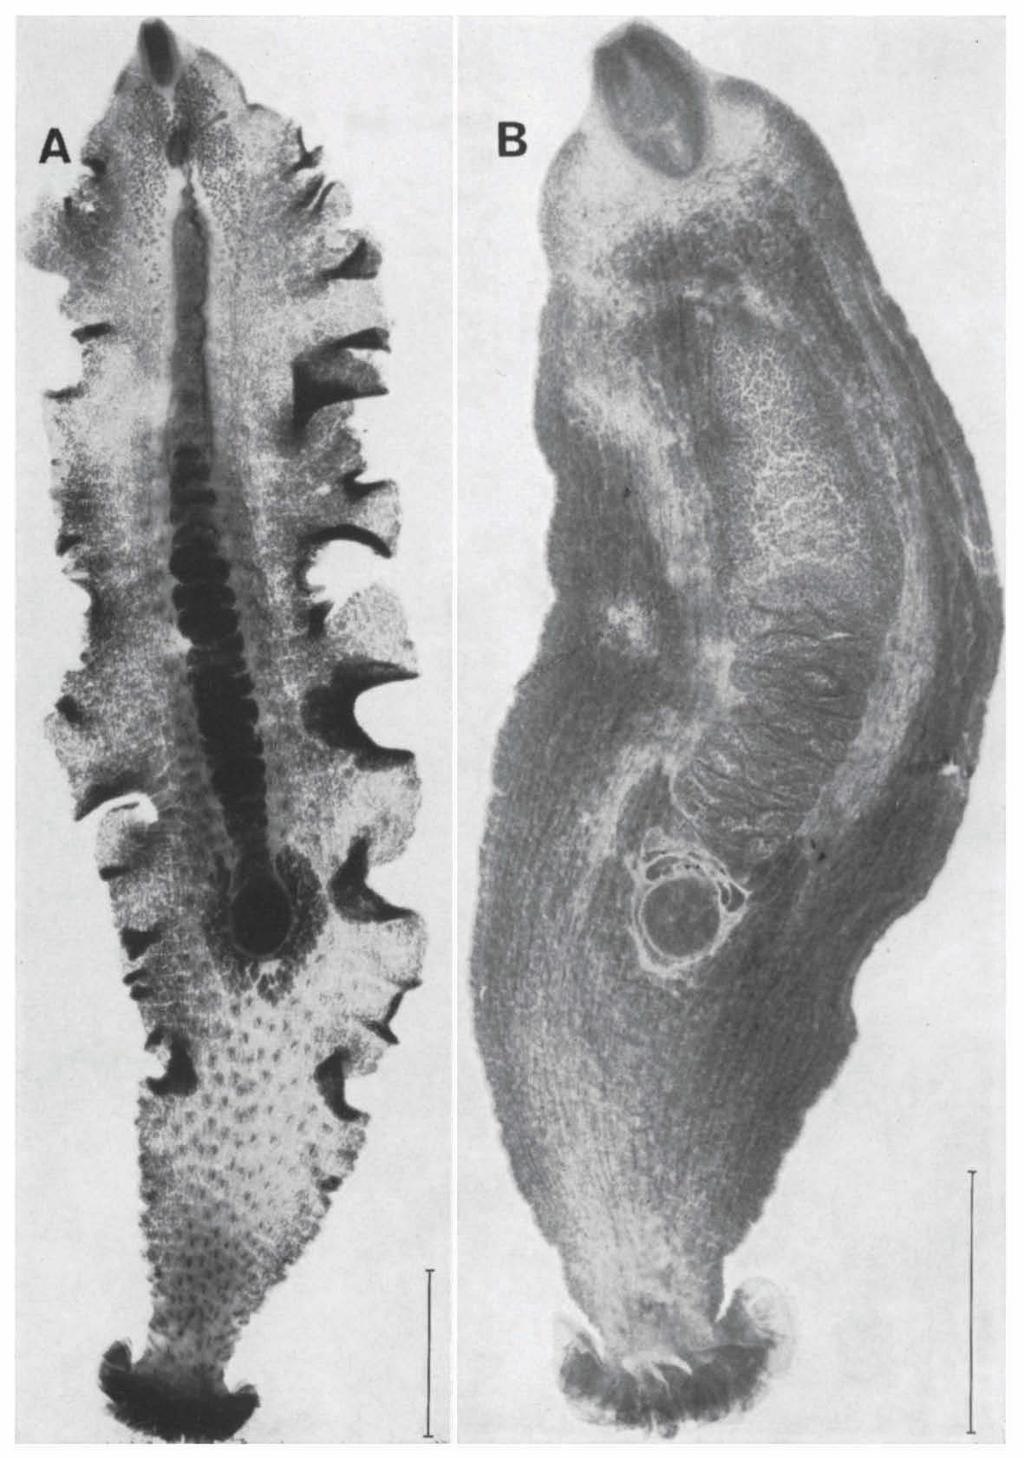 ZOOLOGTSCHE MEDEDELINGEN 43 (8) PL. 1 Fig. A. Gyrocotylc parvis pinosa Lynch, dorsal view, after whole mount prepared by J. E. Lynch (lectotype).